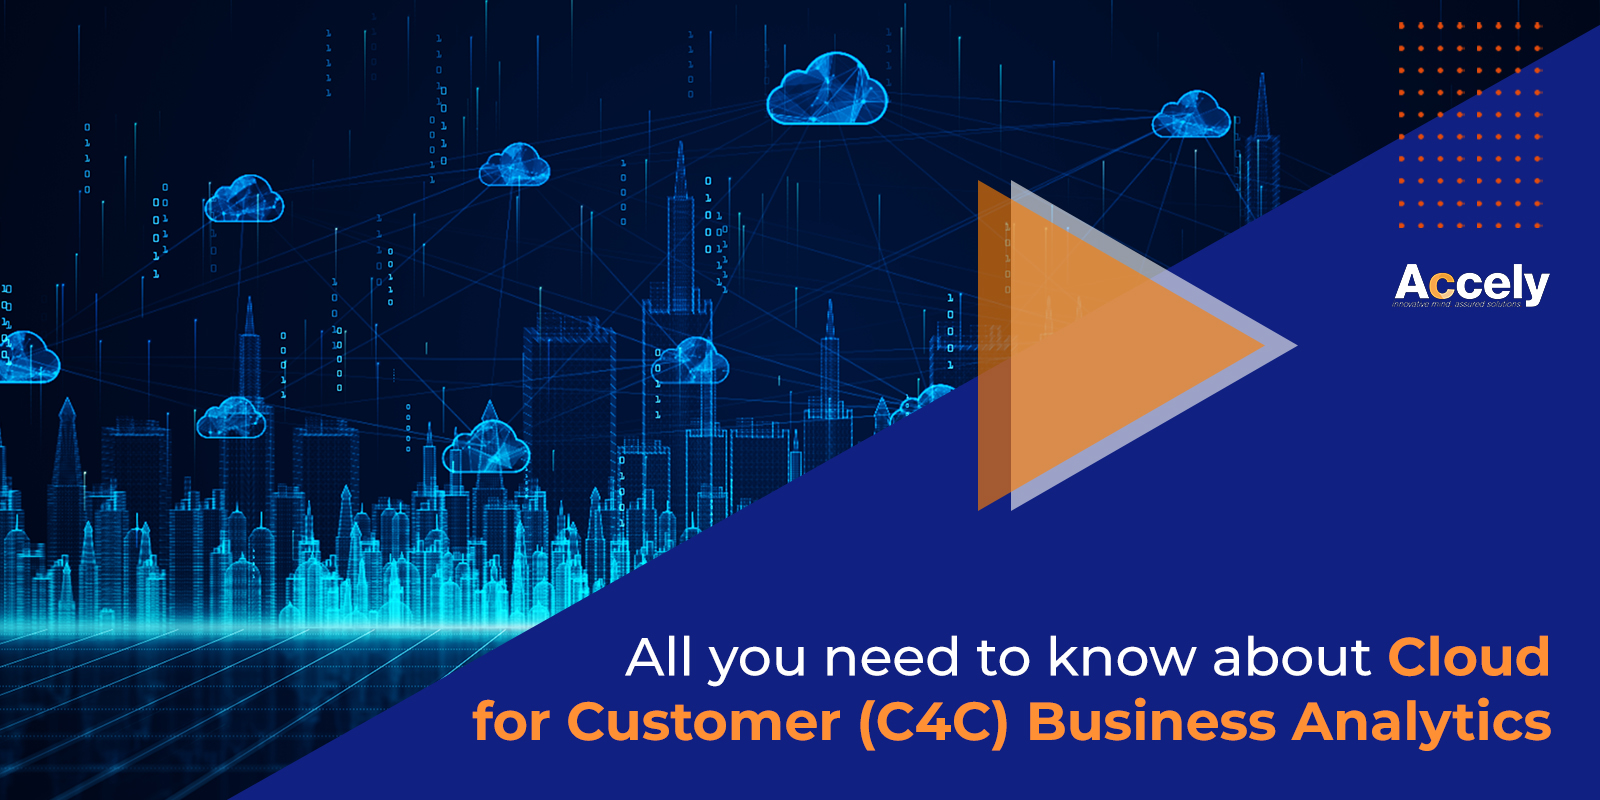 All you need to know about Cloud for Customer (C4C) Business Analytics